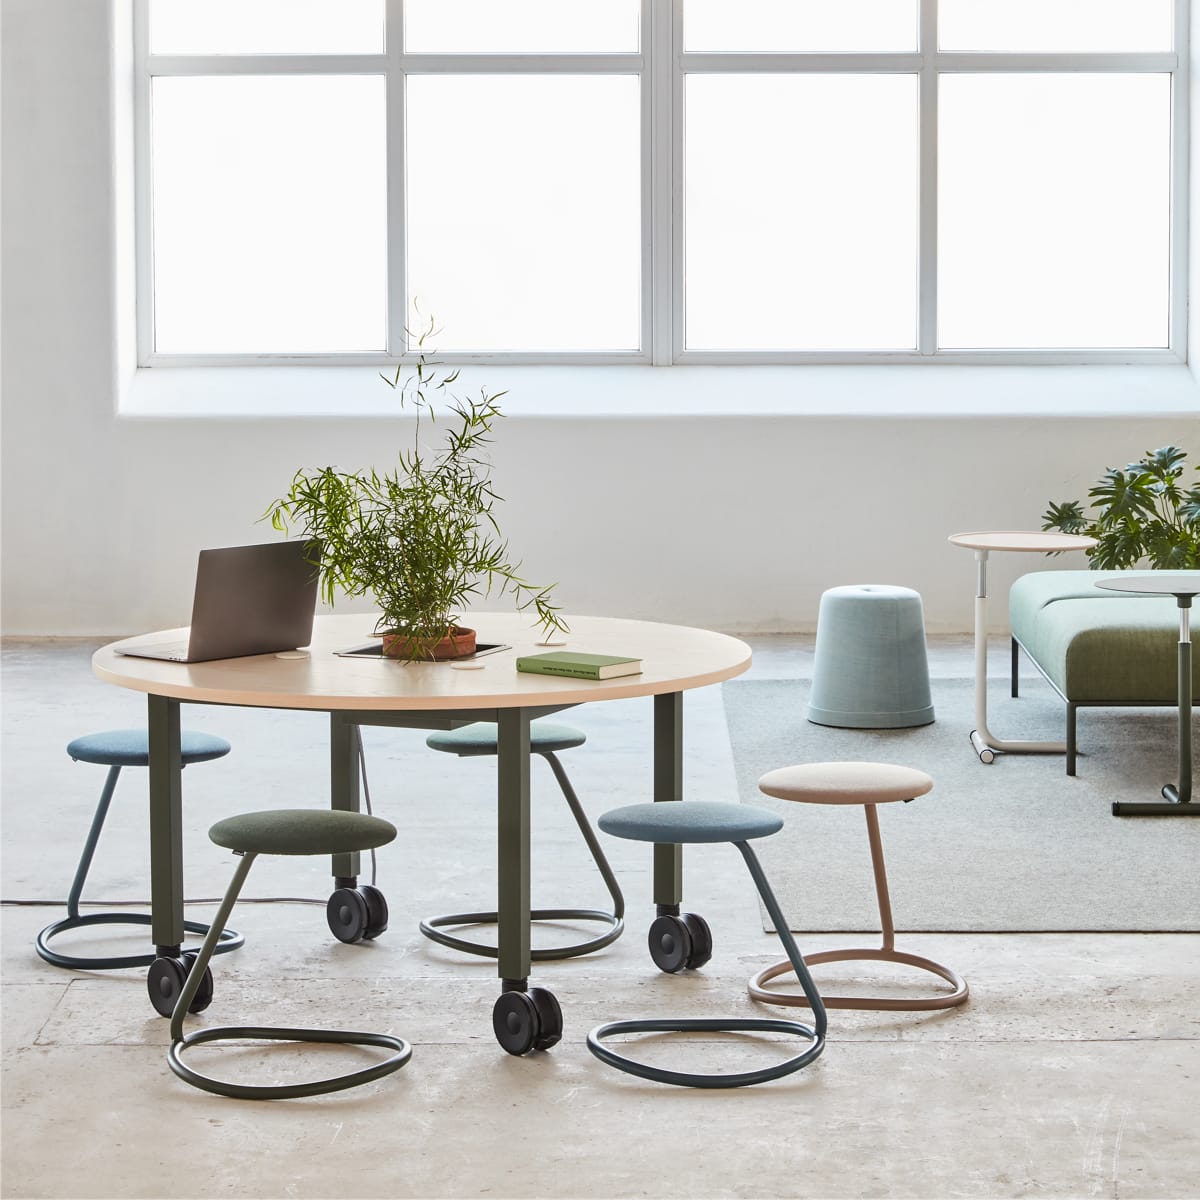 Rocca stool with bent steel tube ring for ergonomic rocking that acts as a support leg and seat cushion in different colors at a round table in large industrial hall